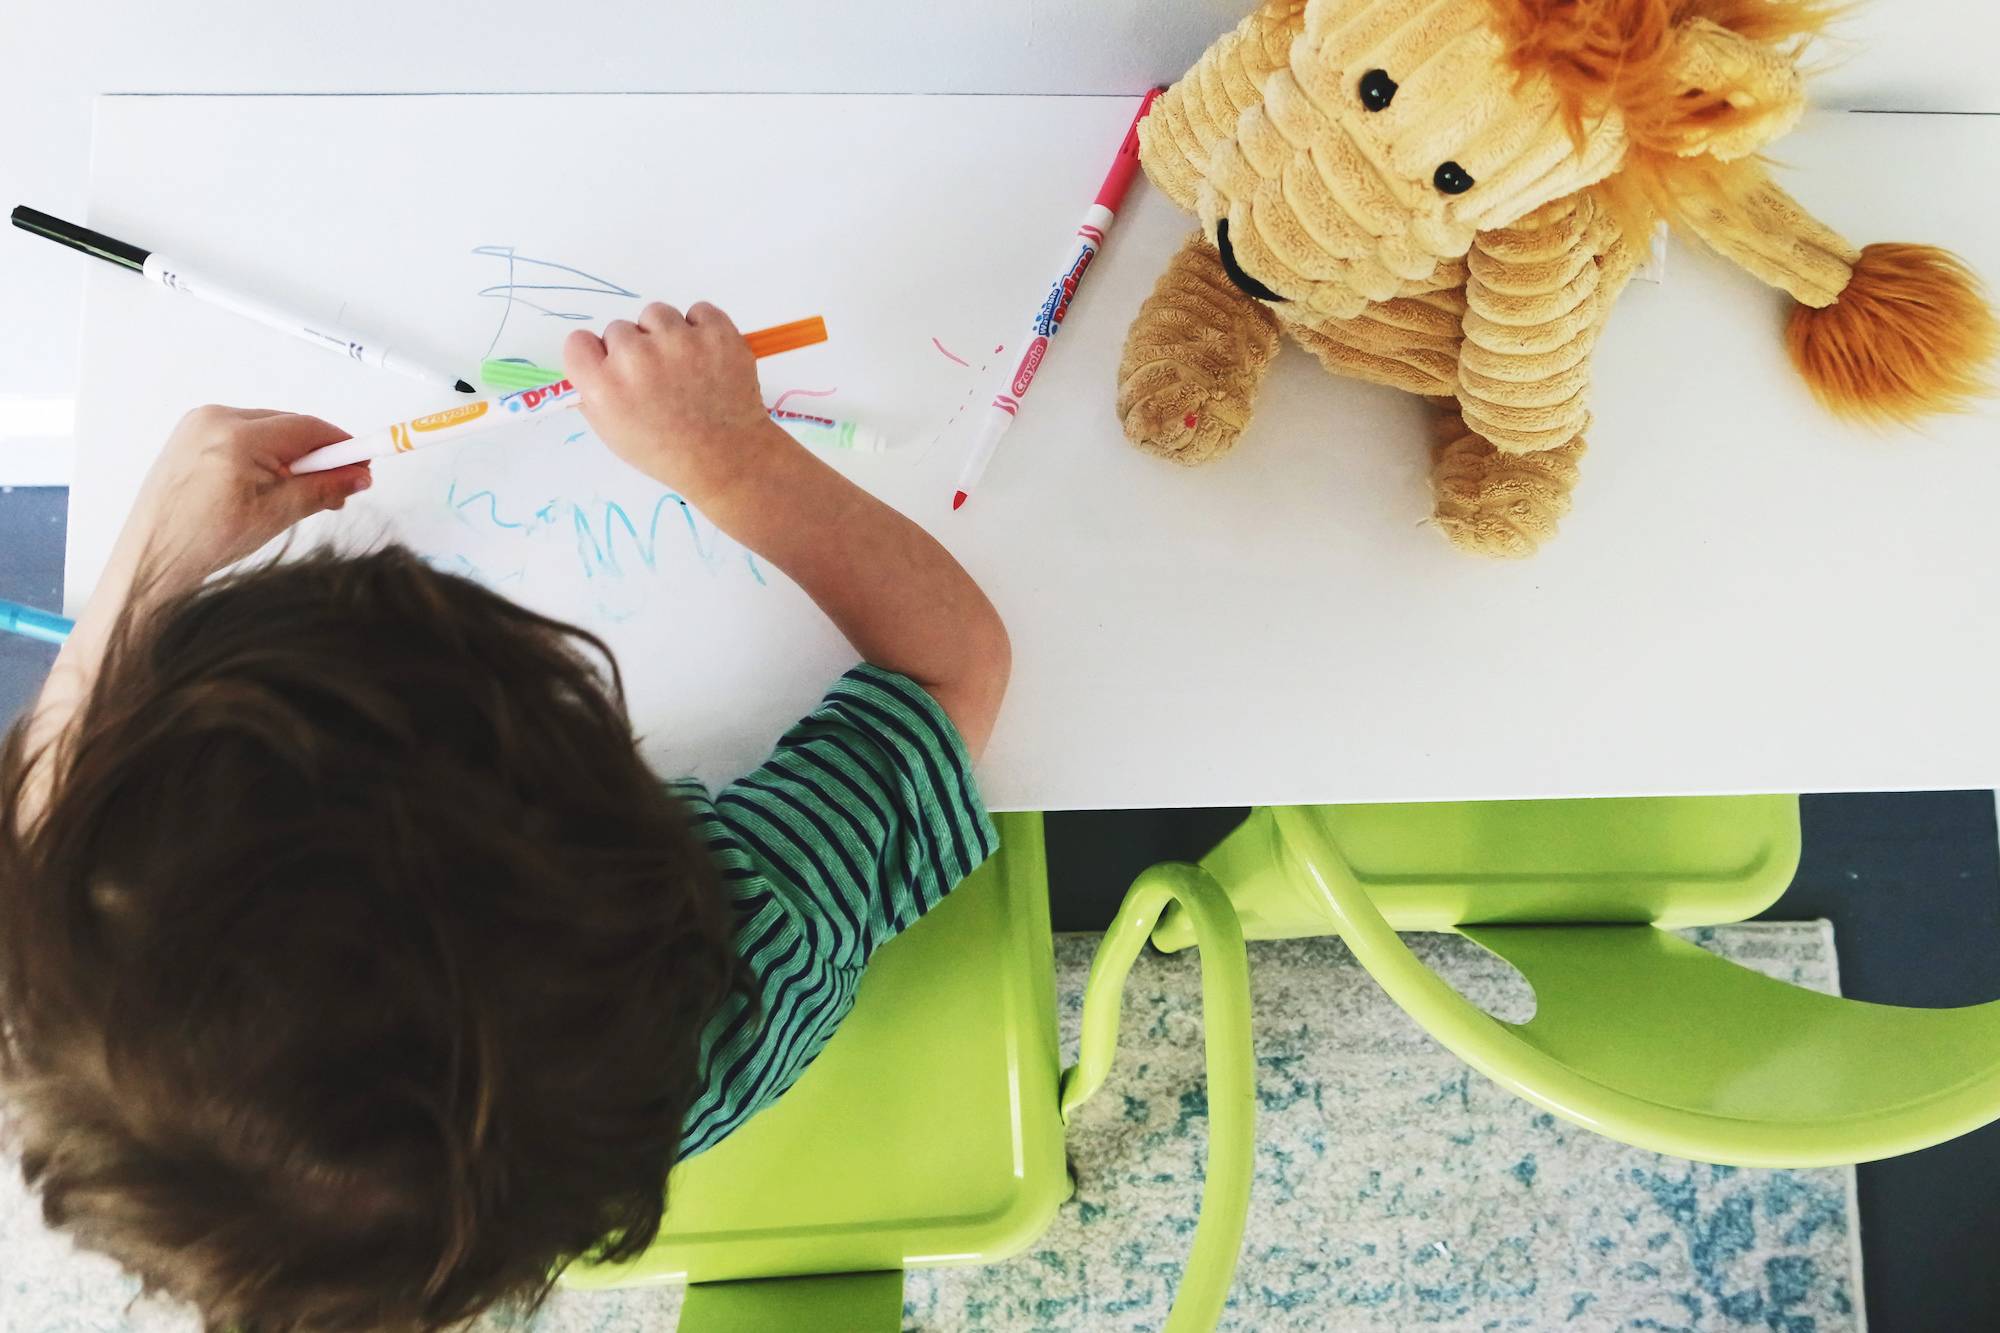 Using Sketch Pad paint from Sherwin-Williams, we were able to create a desk that our toddler could draw all over!